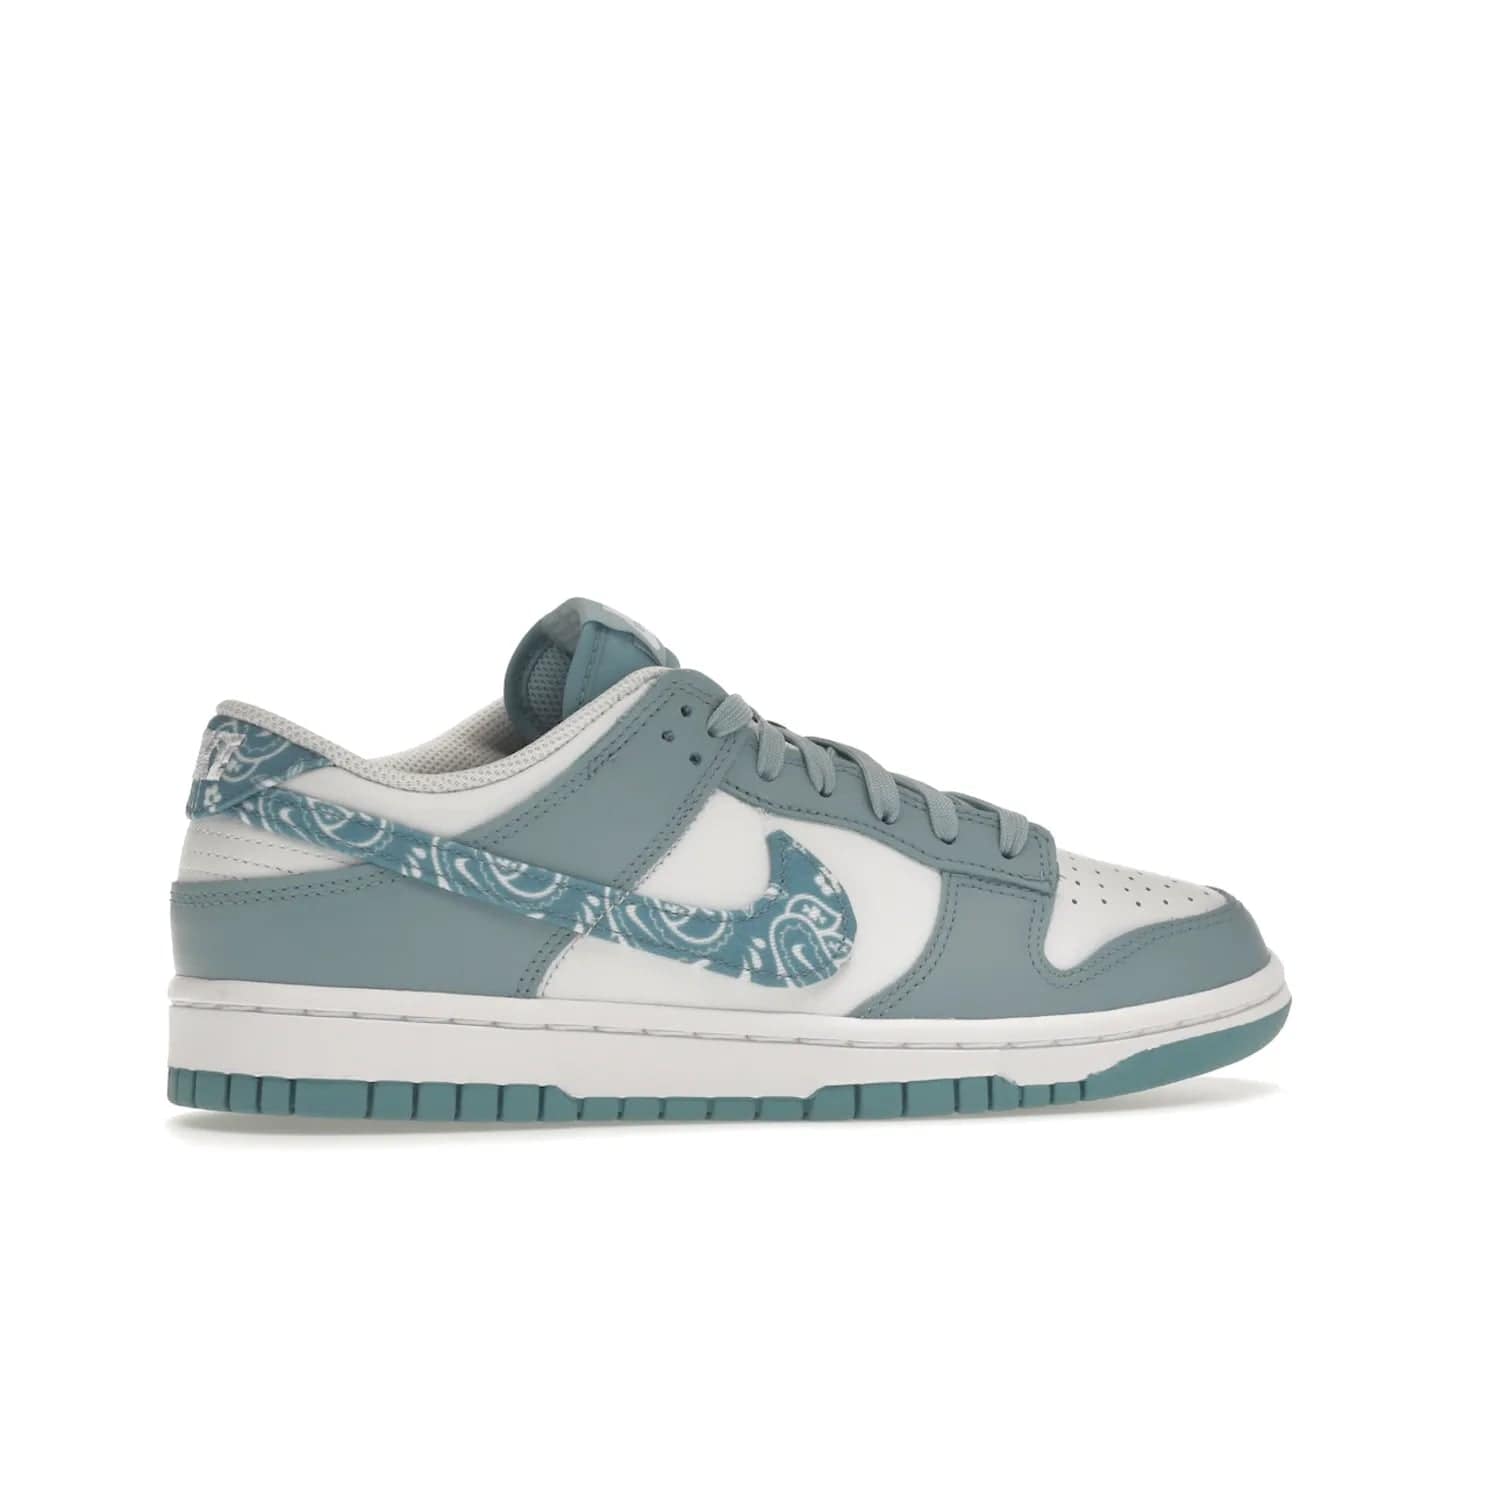 Nike Dunk Low Essential Paisley Pack Worn Blue (Women's) - Image 35 - Only at www.BallersClubKickz.com - Get the Nike Dunk Low Essential Paisley Pack Worn Blue (Women's) for style and comfort. White leather construction, light blue leather overlays, canvas Swooshes and matching heel tabs offer a rich blue hue. Finished by a white and light blue sole, this classic Nike Dunk is the perfect addition to any wardrobe. Released in March 2022.